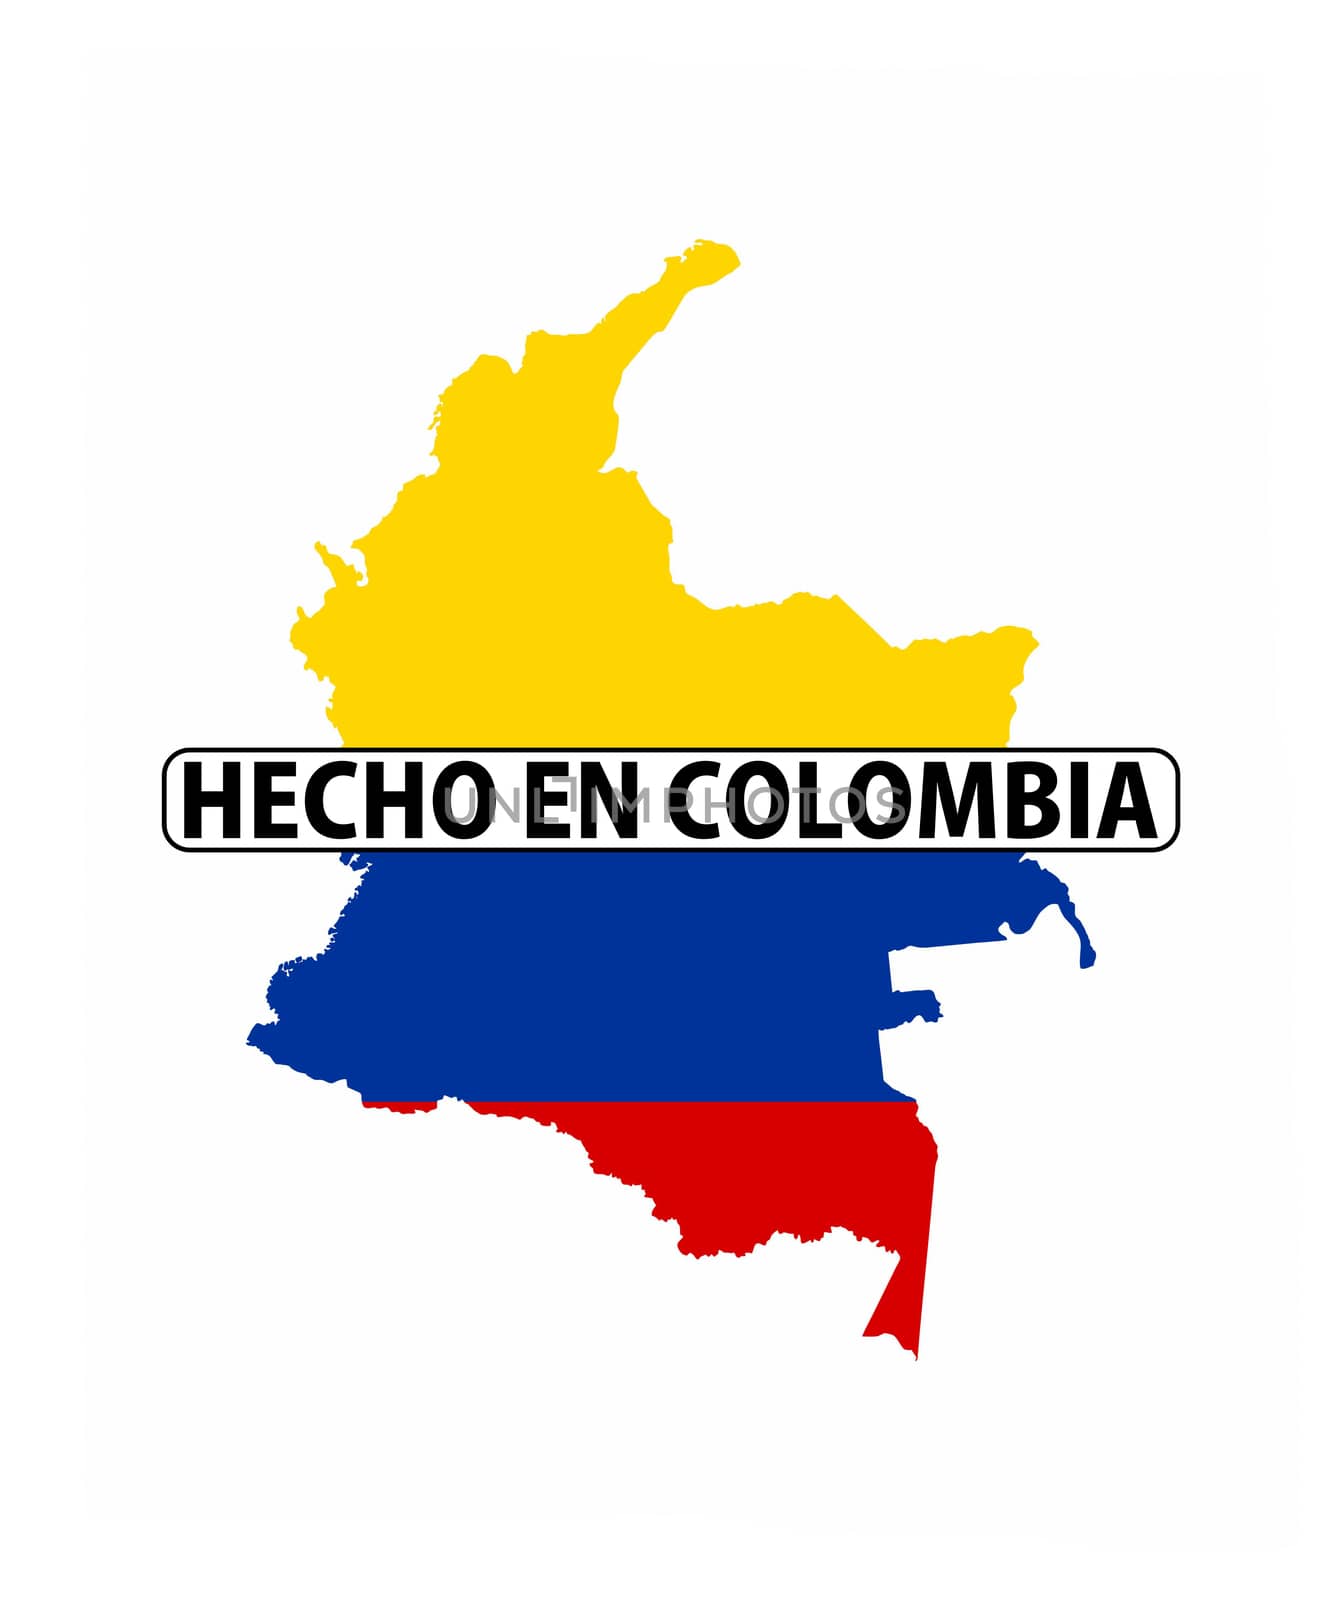 made in colombia by tony4urban